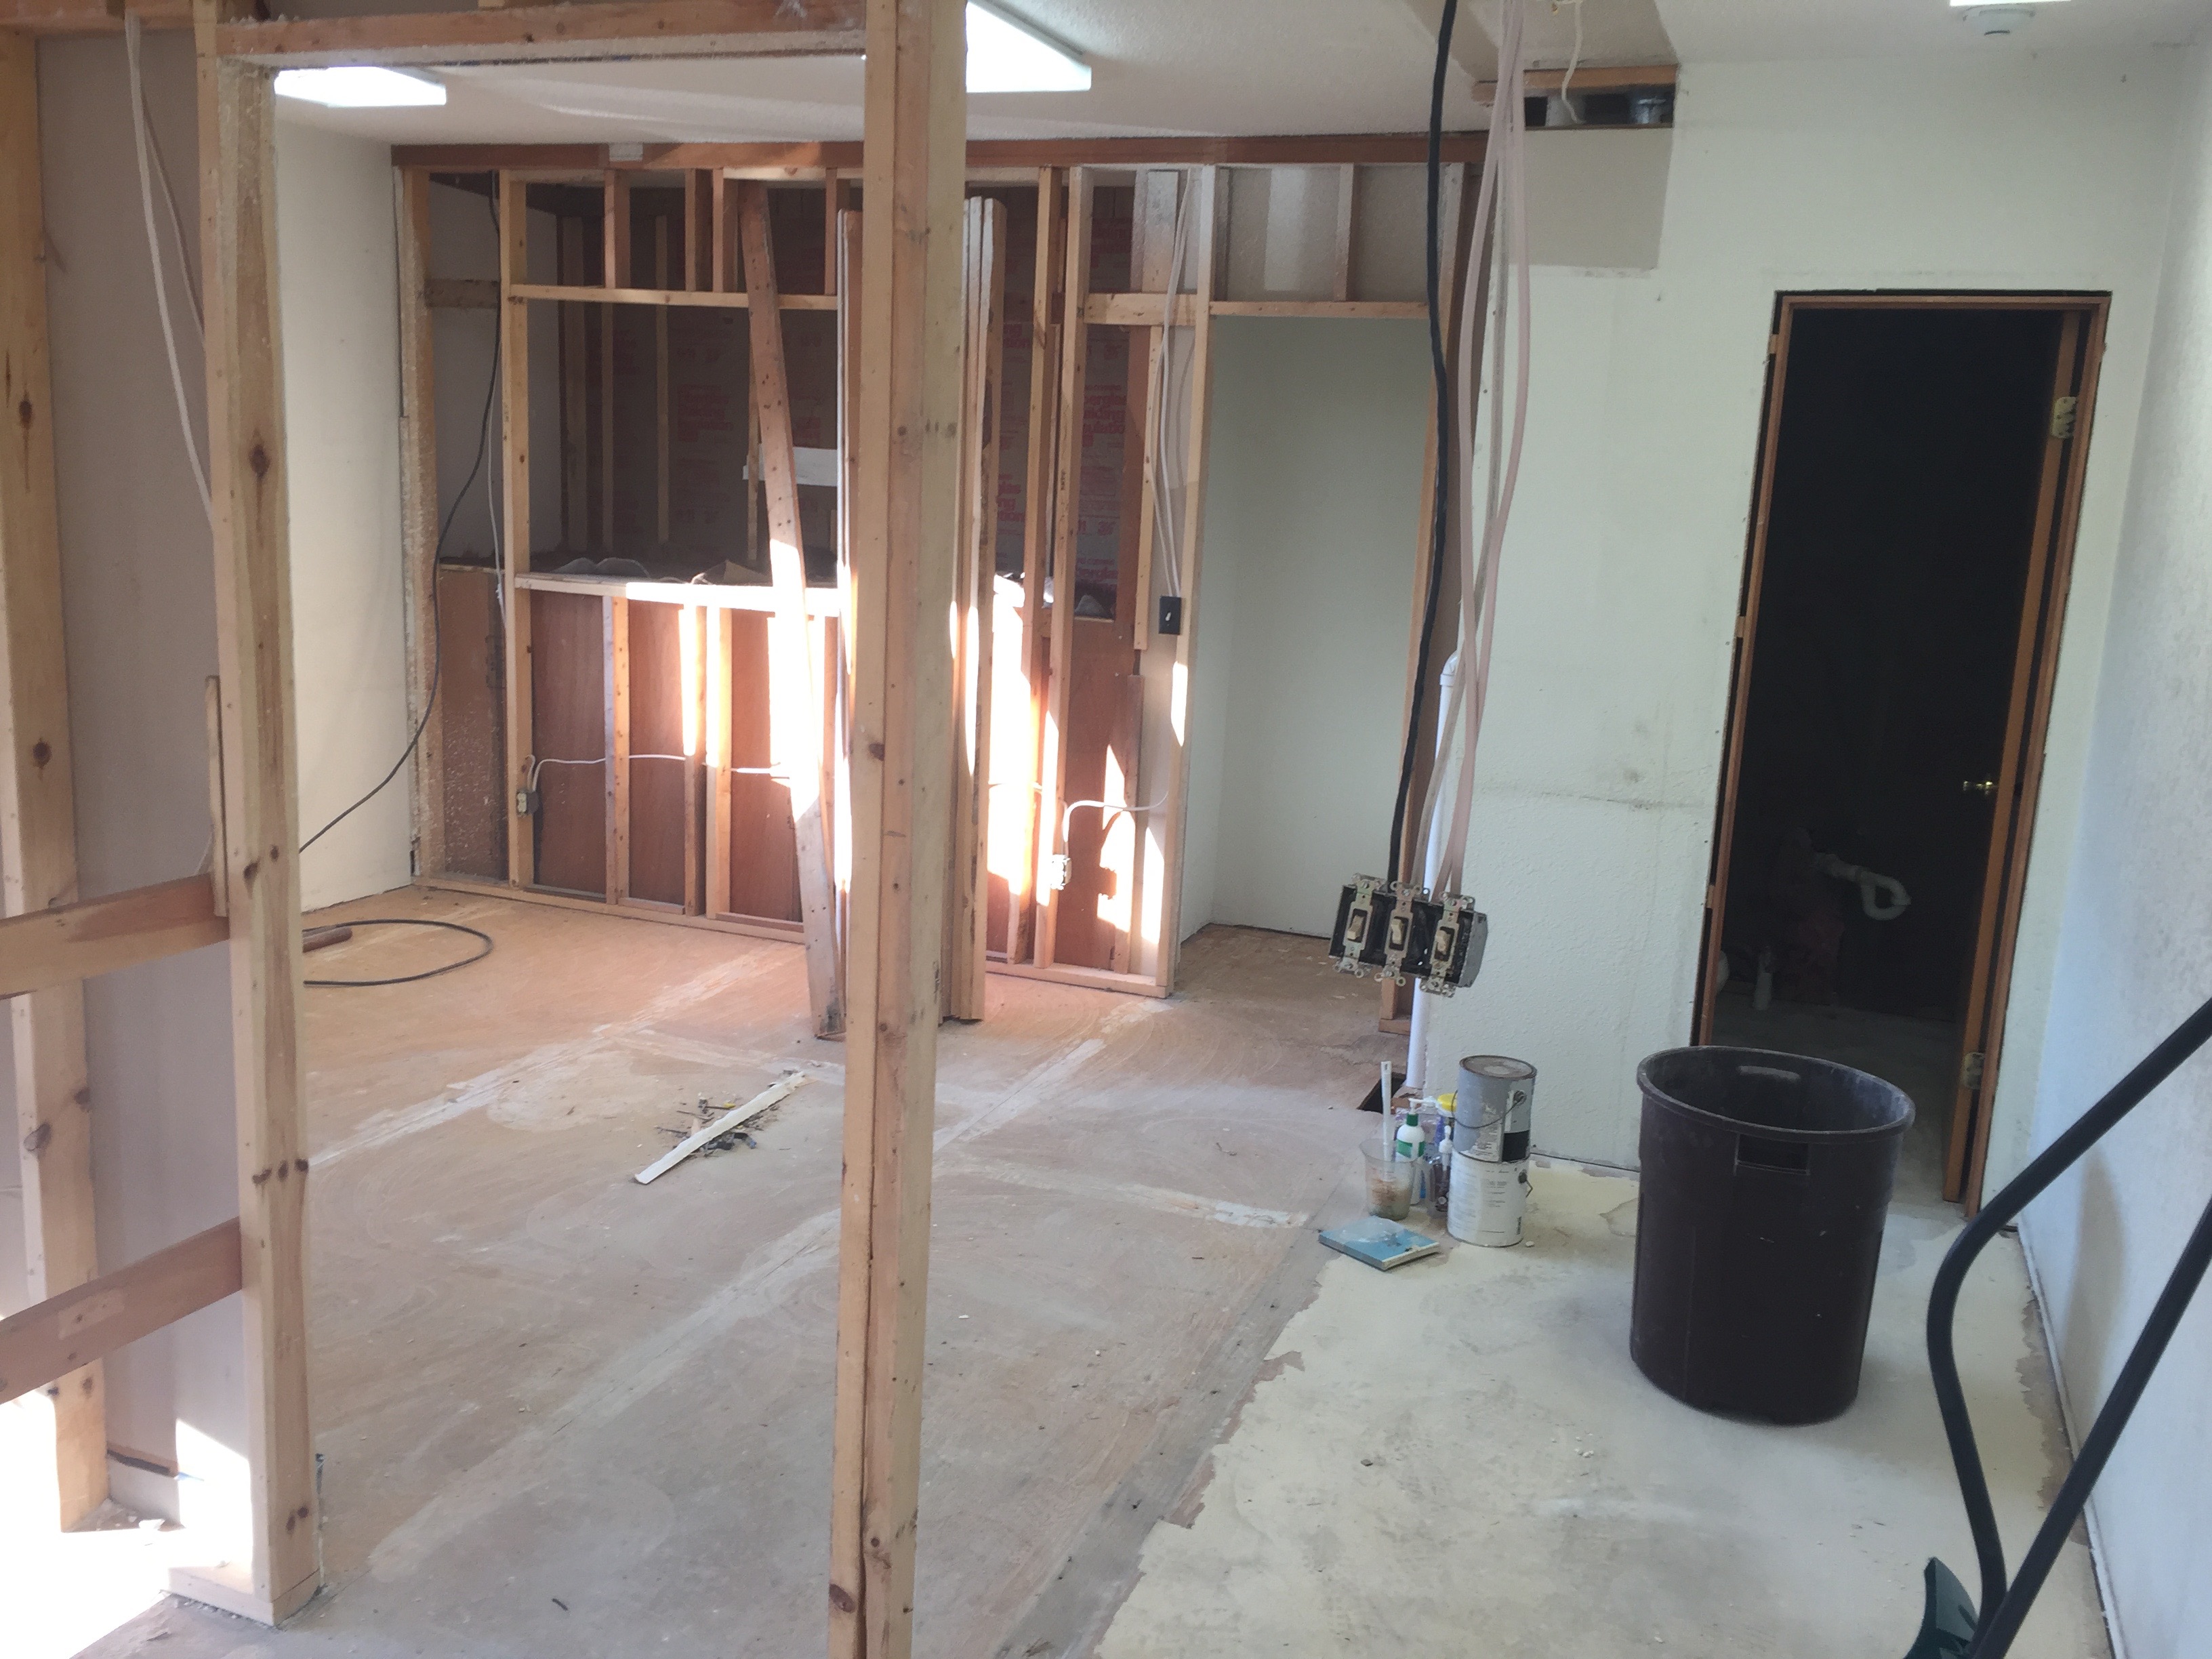 Demo continues on the upstairs offices. The bathroom upstairs will be redone to be ADA accessible.